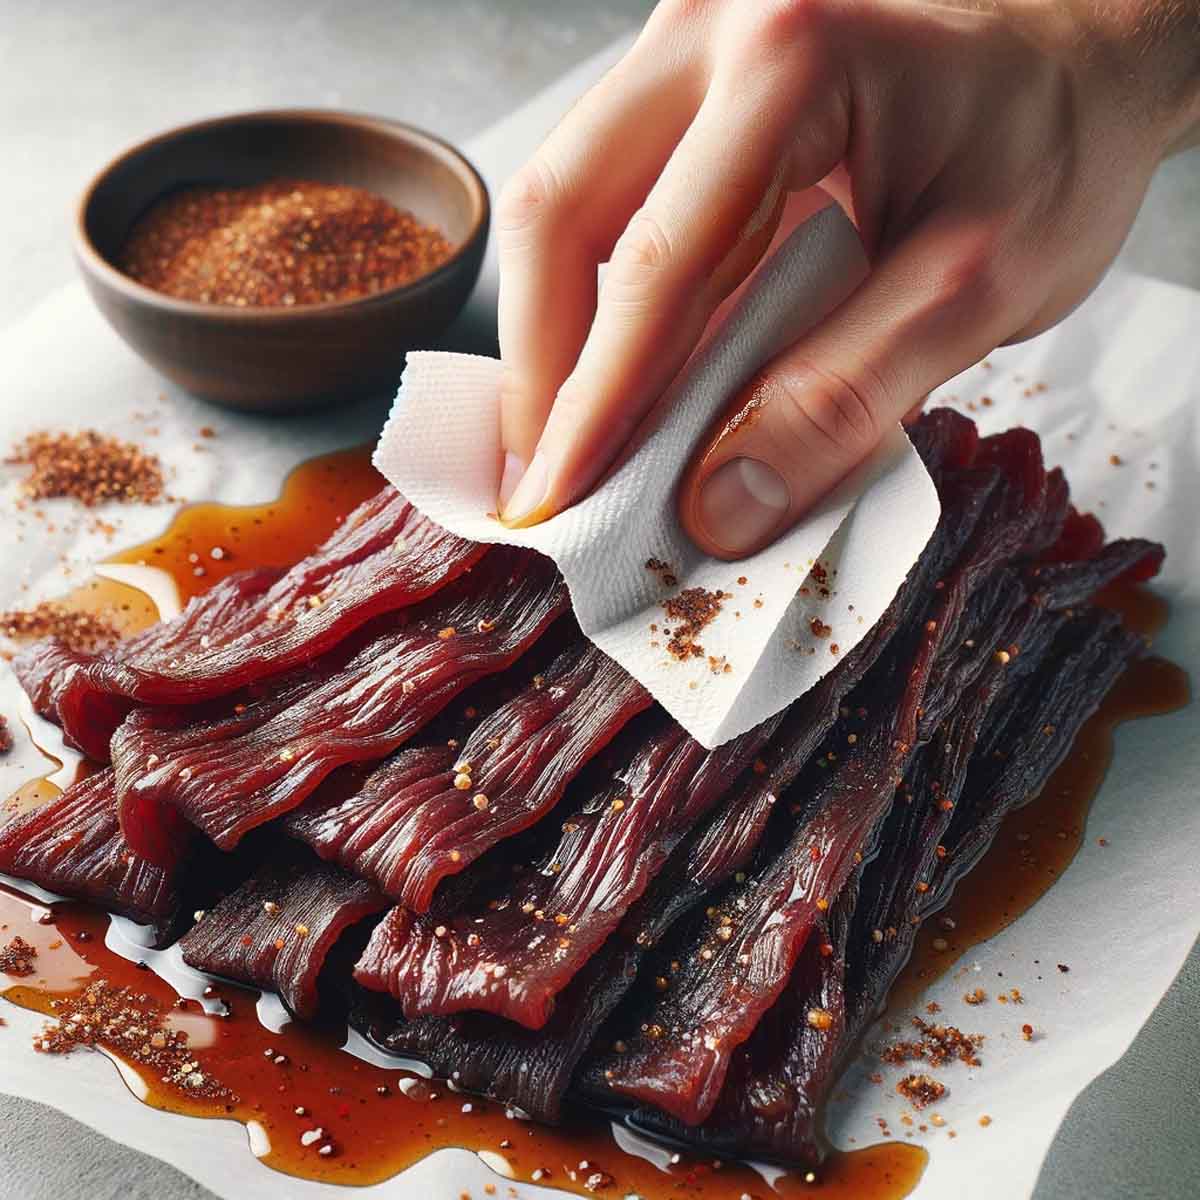 Marinated beef jerky strips being patted dry with paper towels, preparing for dehydration.